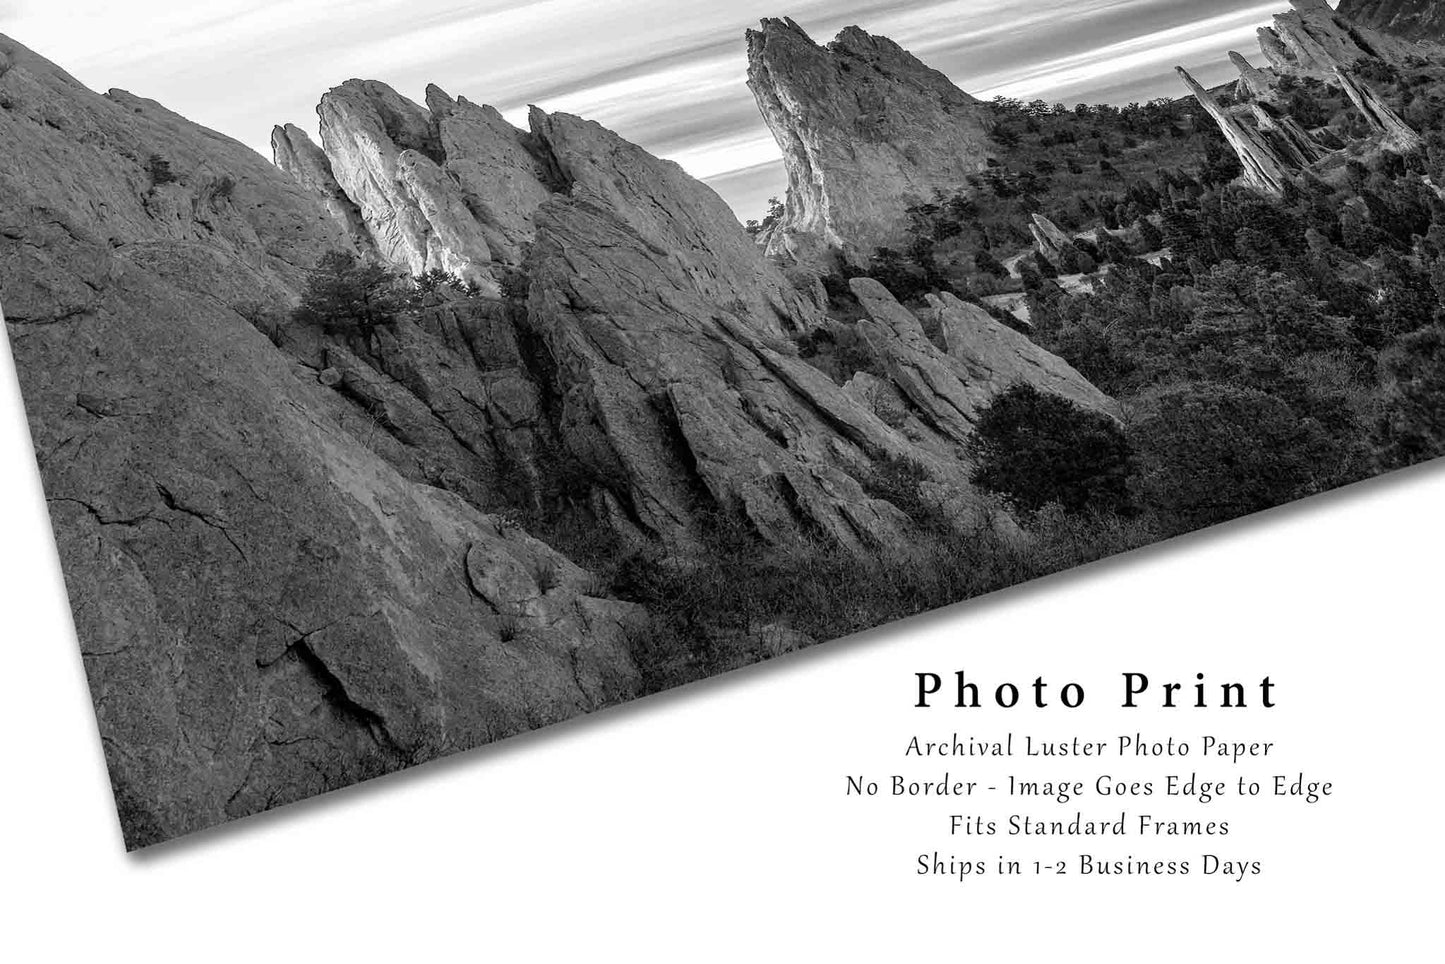 Garden of the Gods Photography Print | Western Landscape Picture | Black and White Wall Art | Colorado Photo | Rocky Mountain Decor | Not Framed